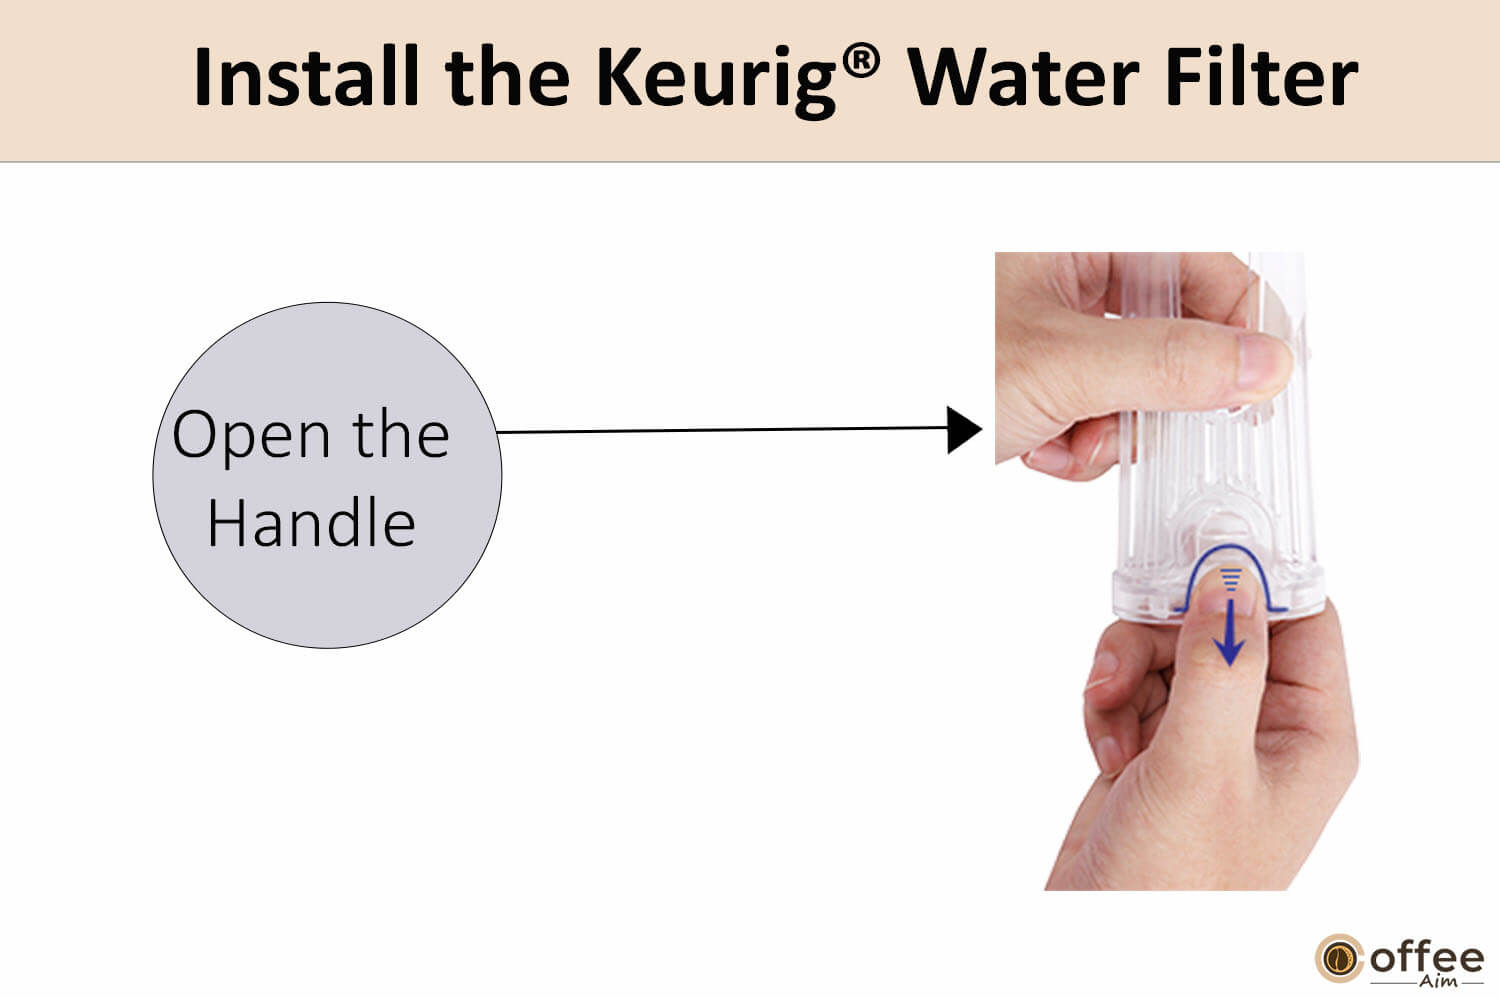 In this image, I have delineated the Install the keurig water filter.